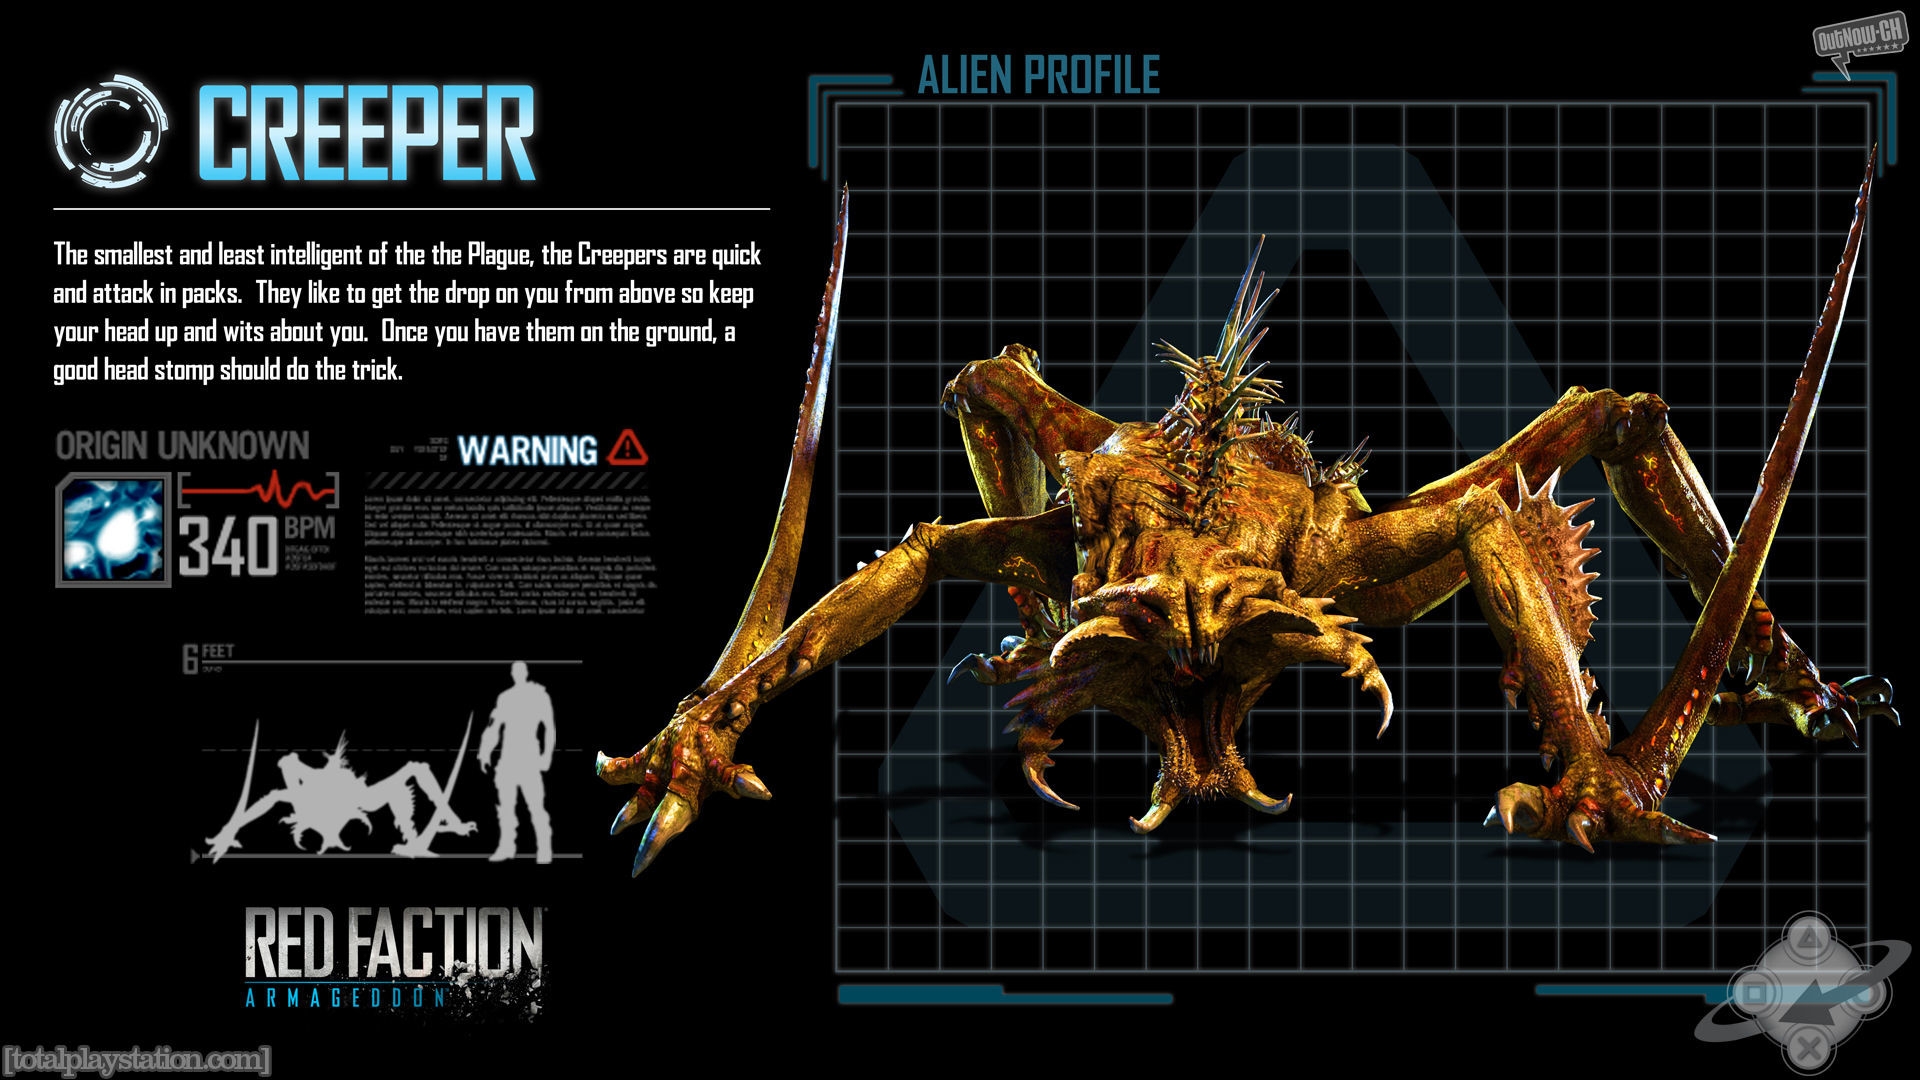 1920x1080 Video Game - Red Faction: Armageddon Creature Alien Game Armagedon Creeper ( Red Fraction)